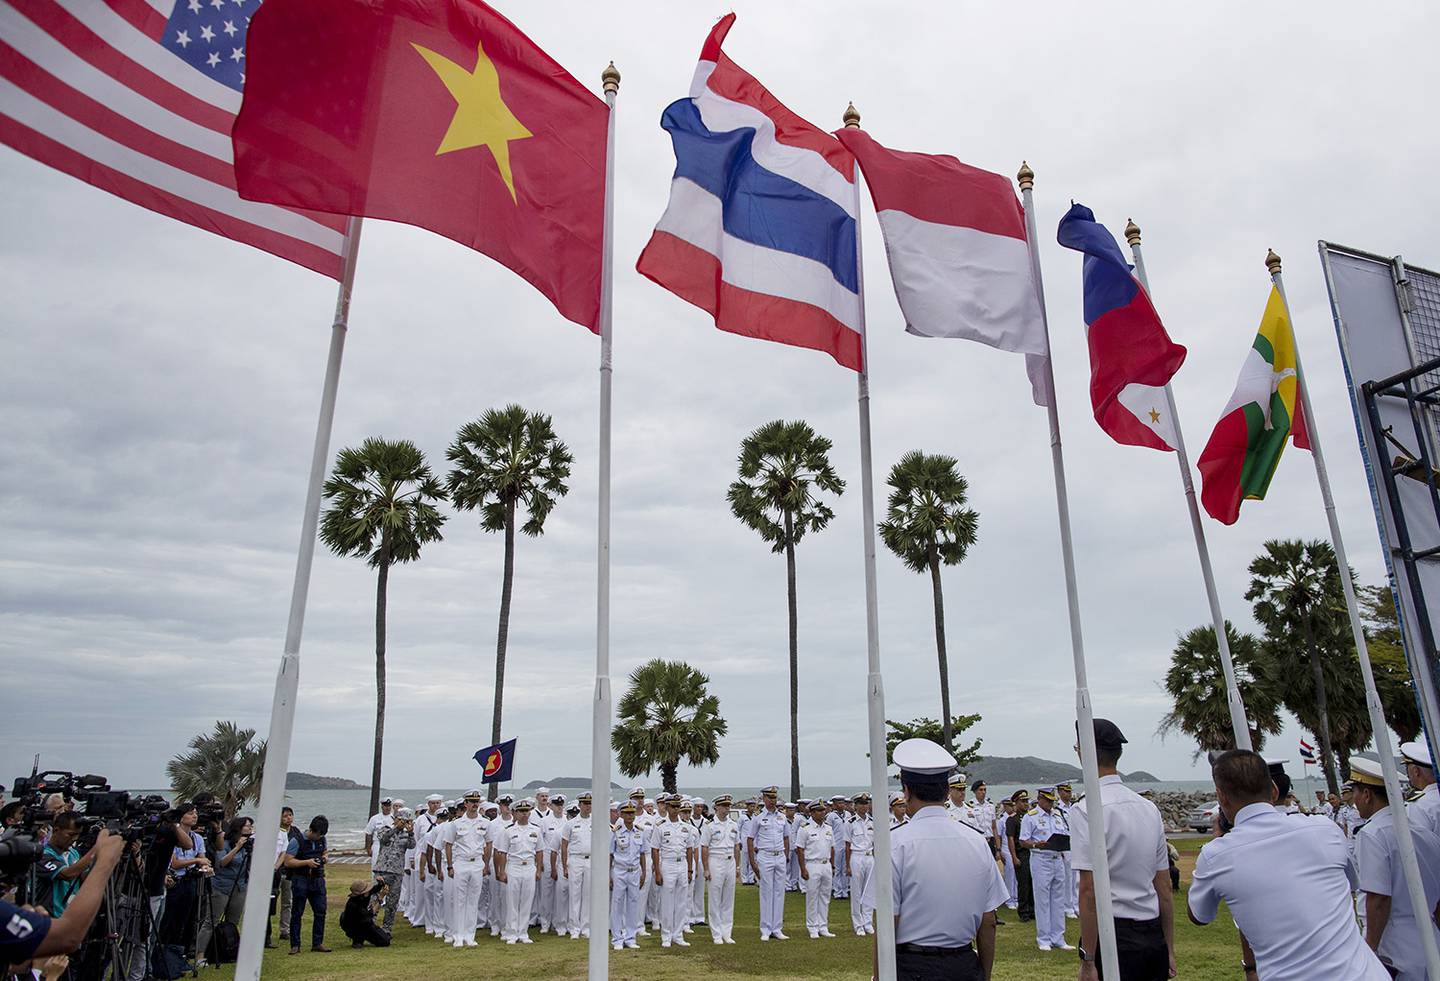 Officers of the U.S. Navy and maritime forces of Association of Southeast Asian Nations (ASEAN) participate in the inauguration ceremony of ASEAN-U.S. Maritime Exercise in Sattahip, Thailand, Monday, Sep. 2, 2019.